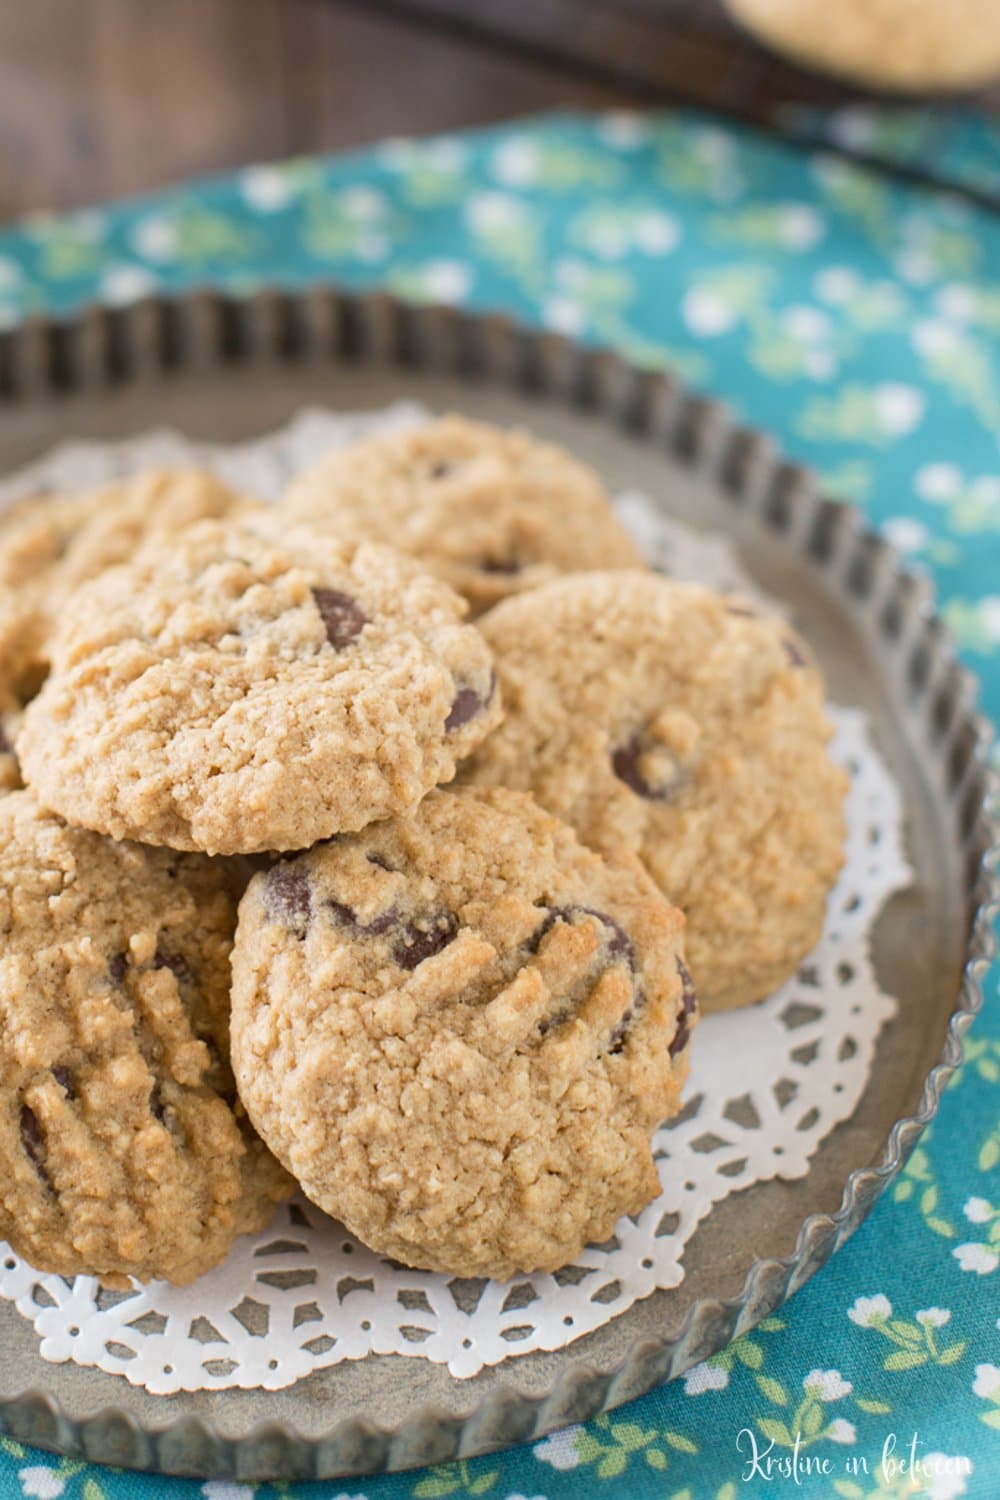 You'll love these lightened up whole grain chocolate chip cookies!